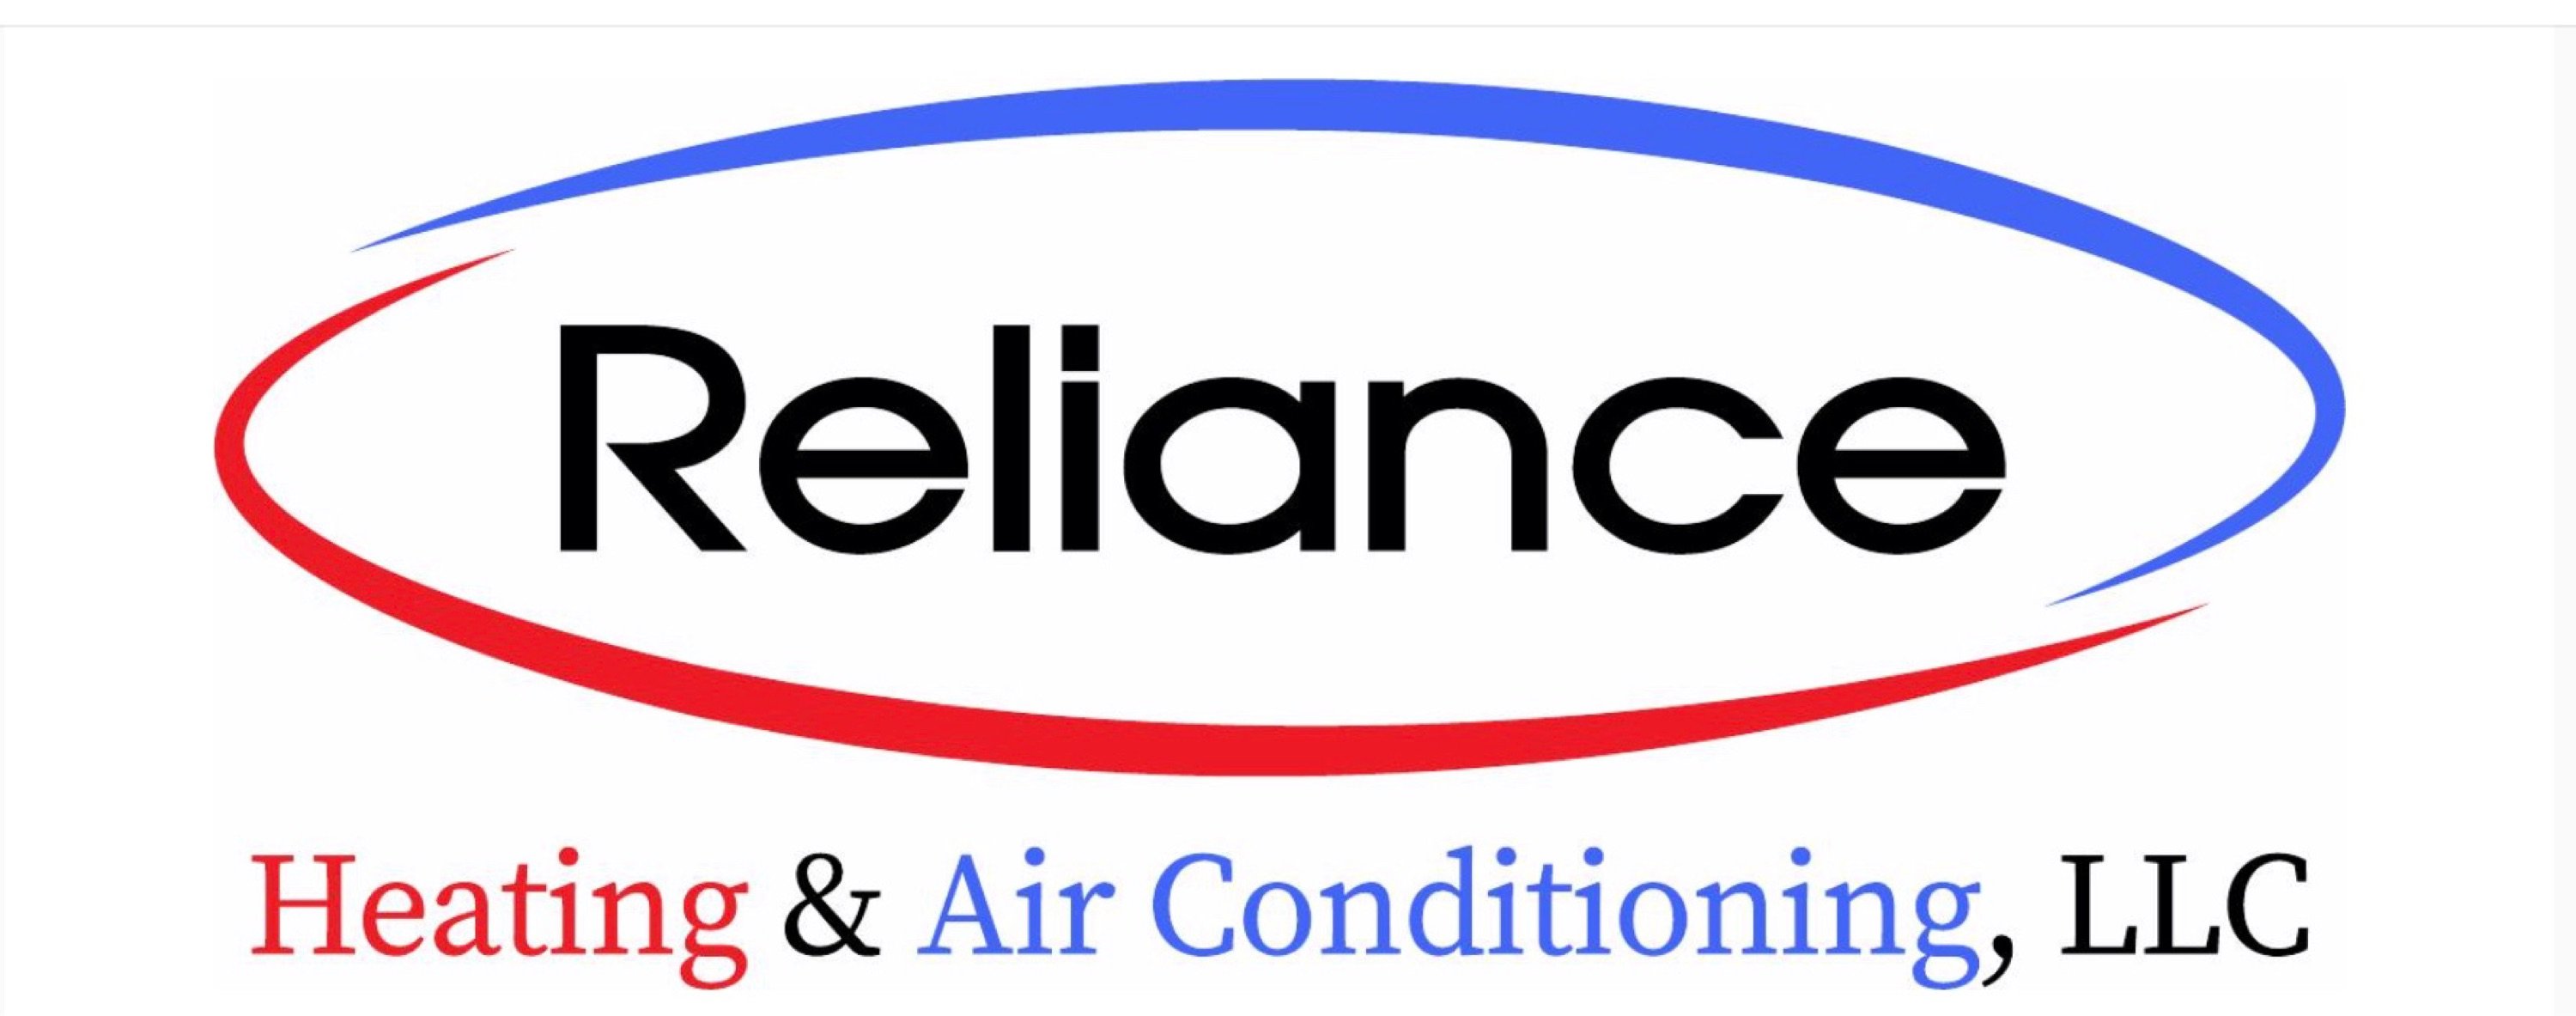 Reliance Heating & Air Conditioning Logo